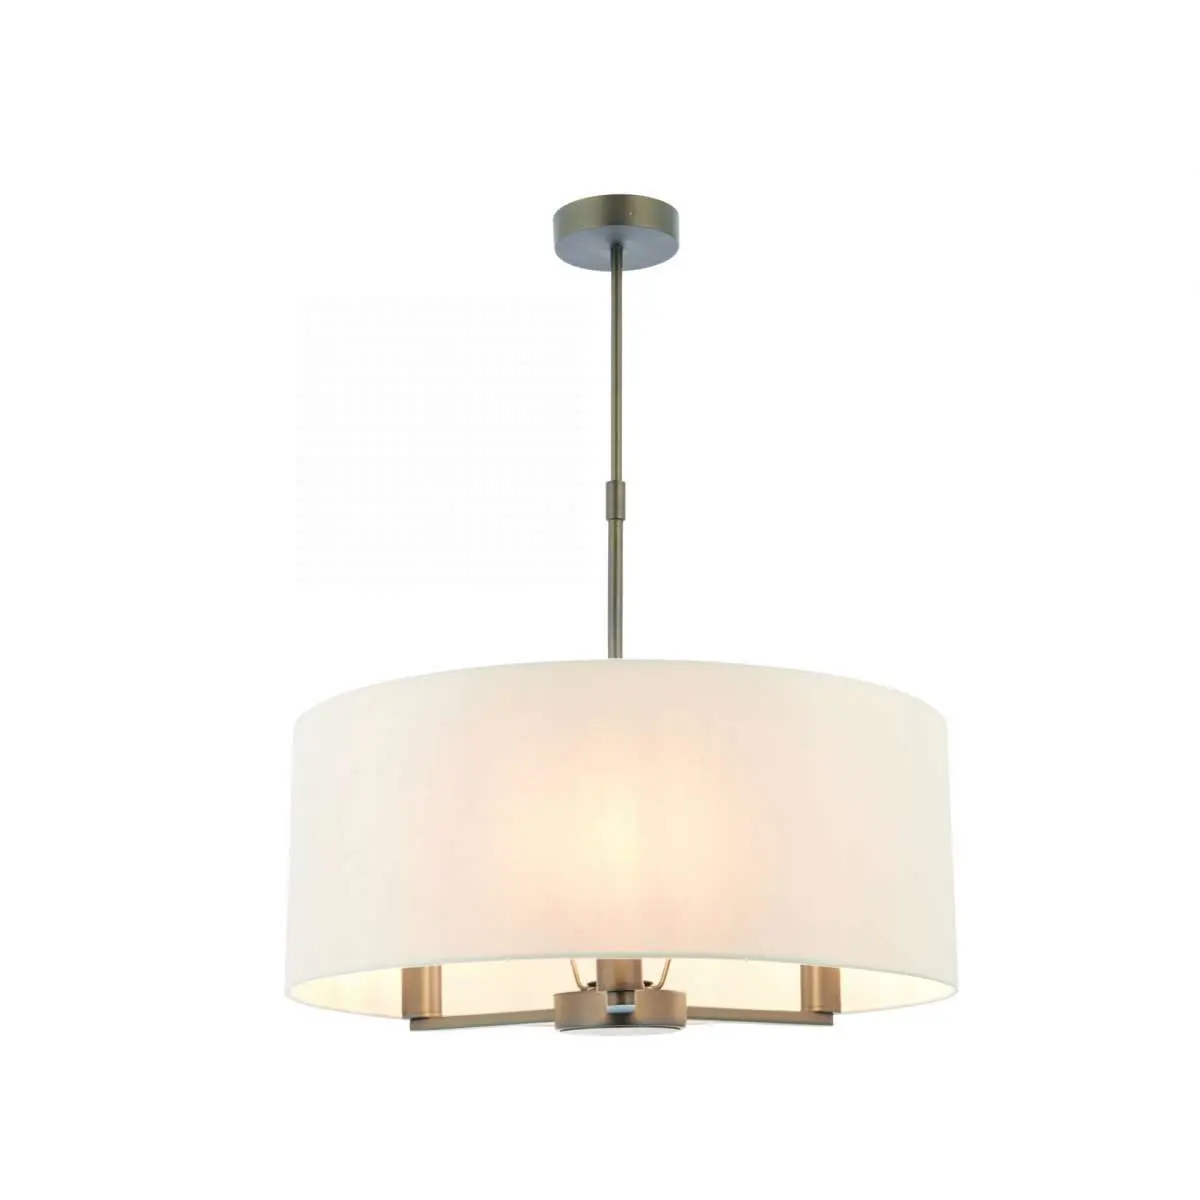 Daley 3 Light Drum Pendant in Bronze C/W Marble Shade